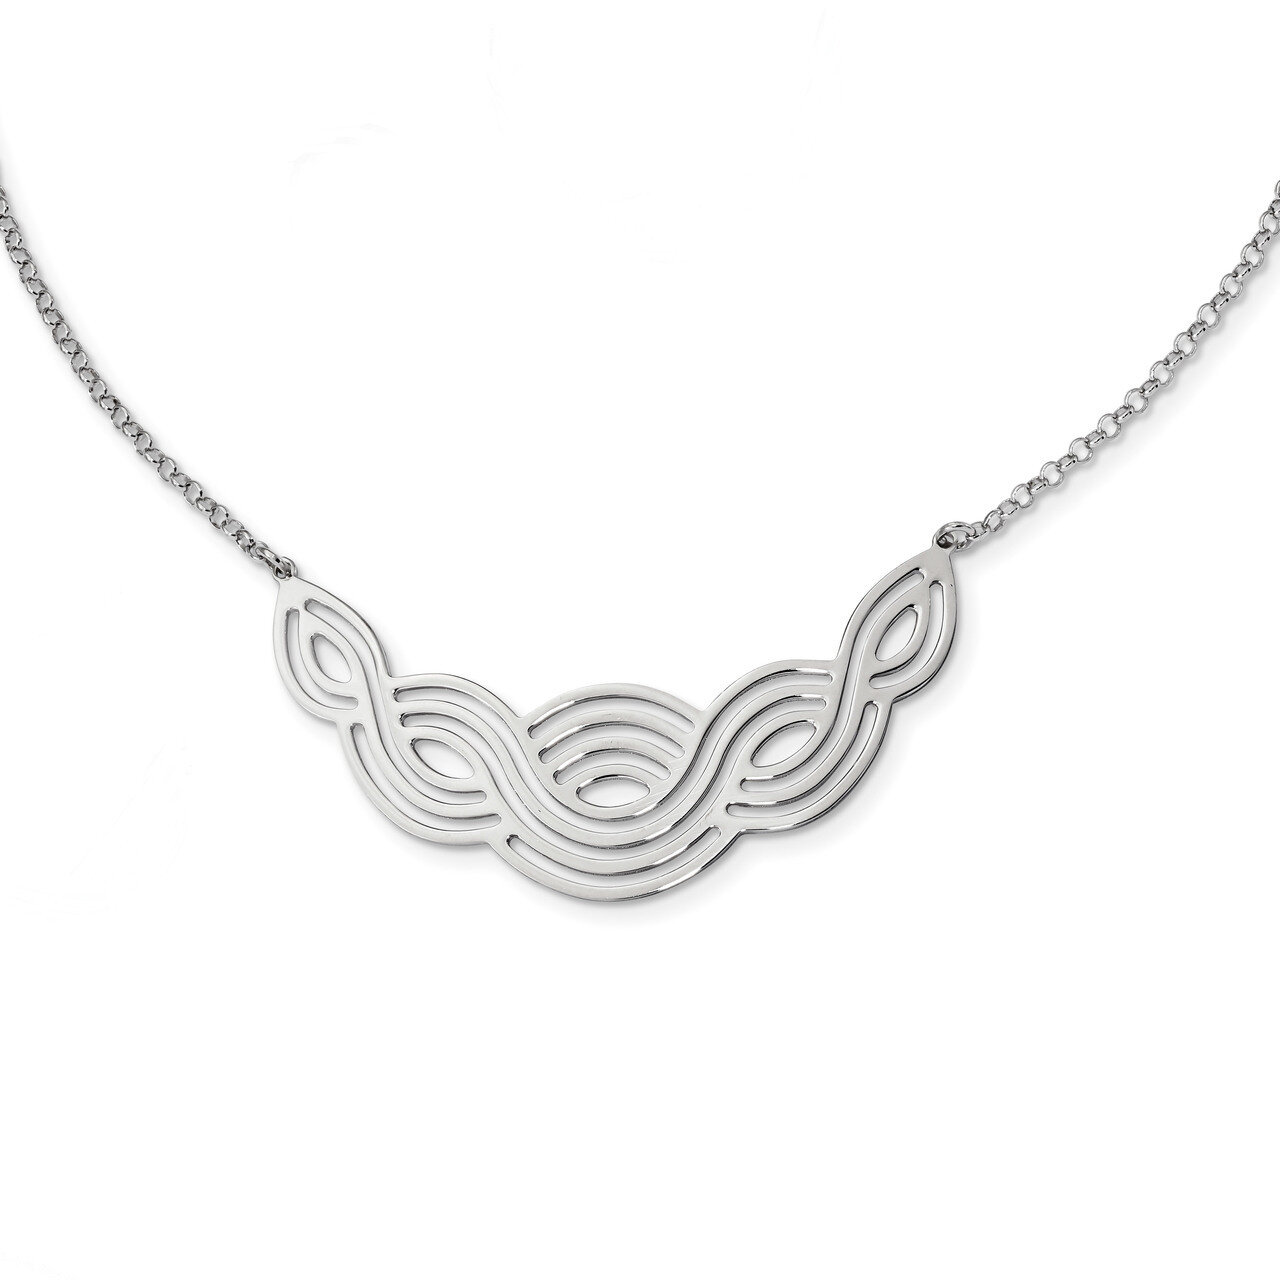 1 ch Fancy Necklace 17 Inch Sterling Silver Rhodium-plated Polished QG4524-17